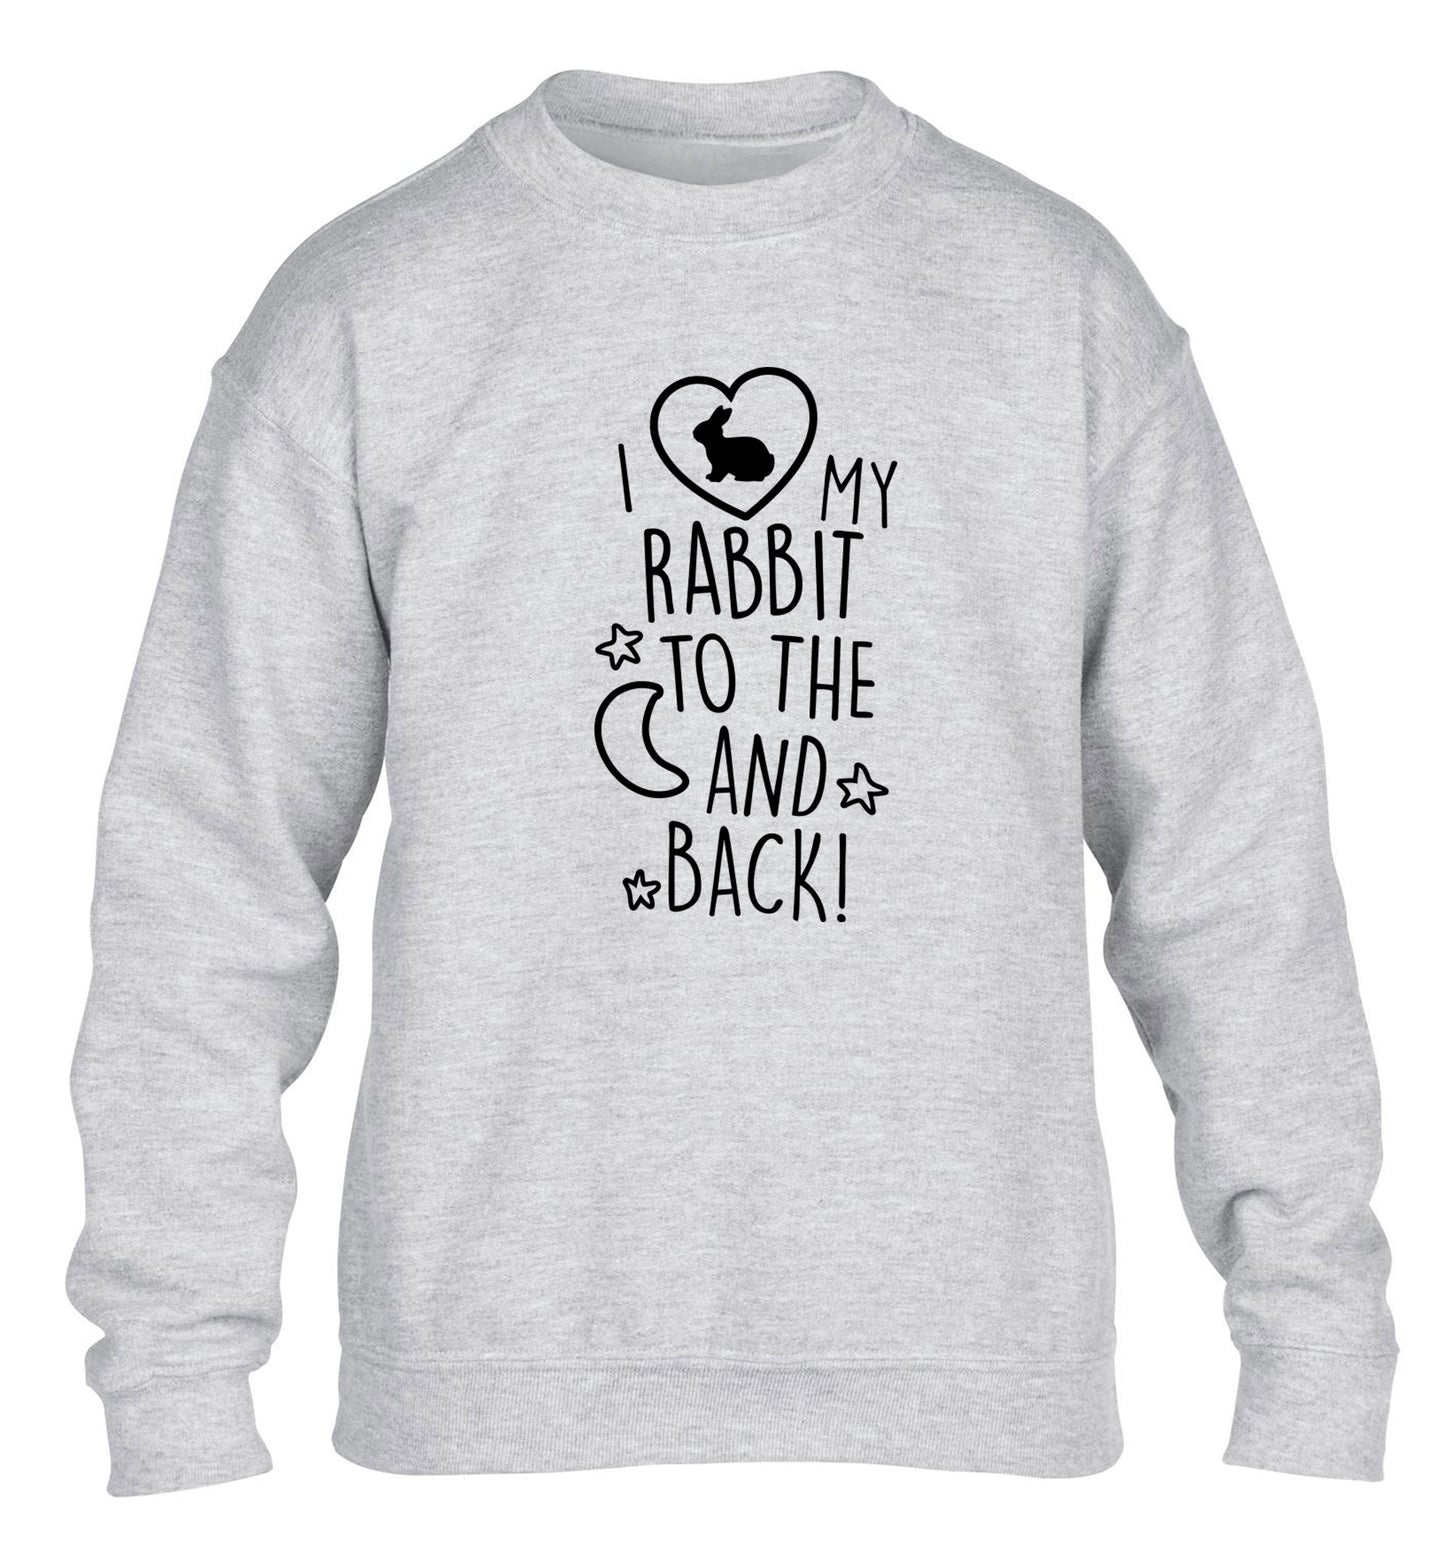 I love my rabbit to the moon and back children's grey  sweater 12-14 Years